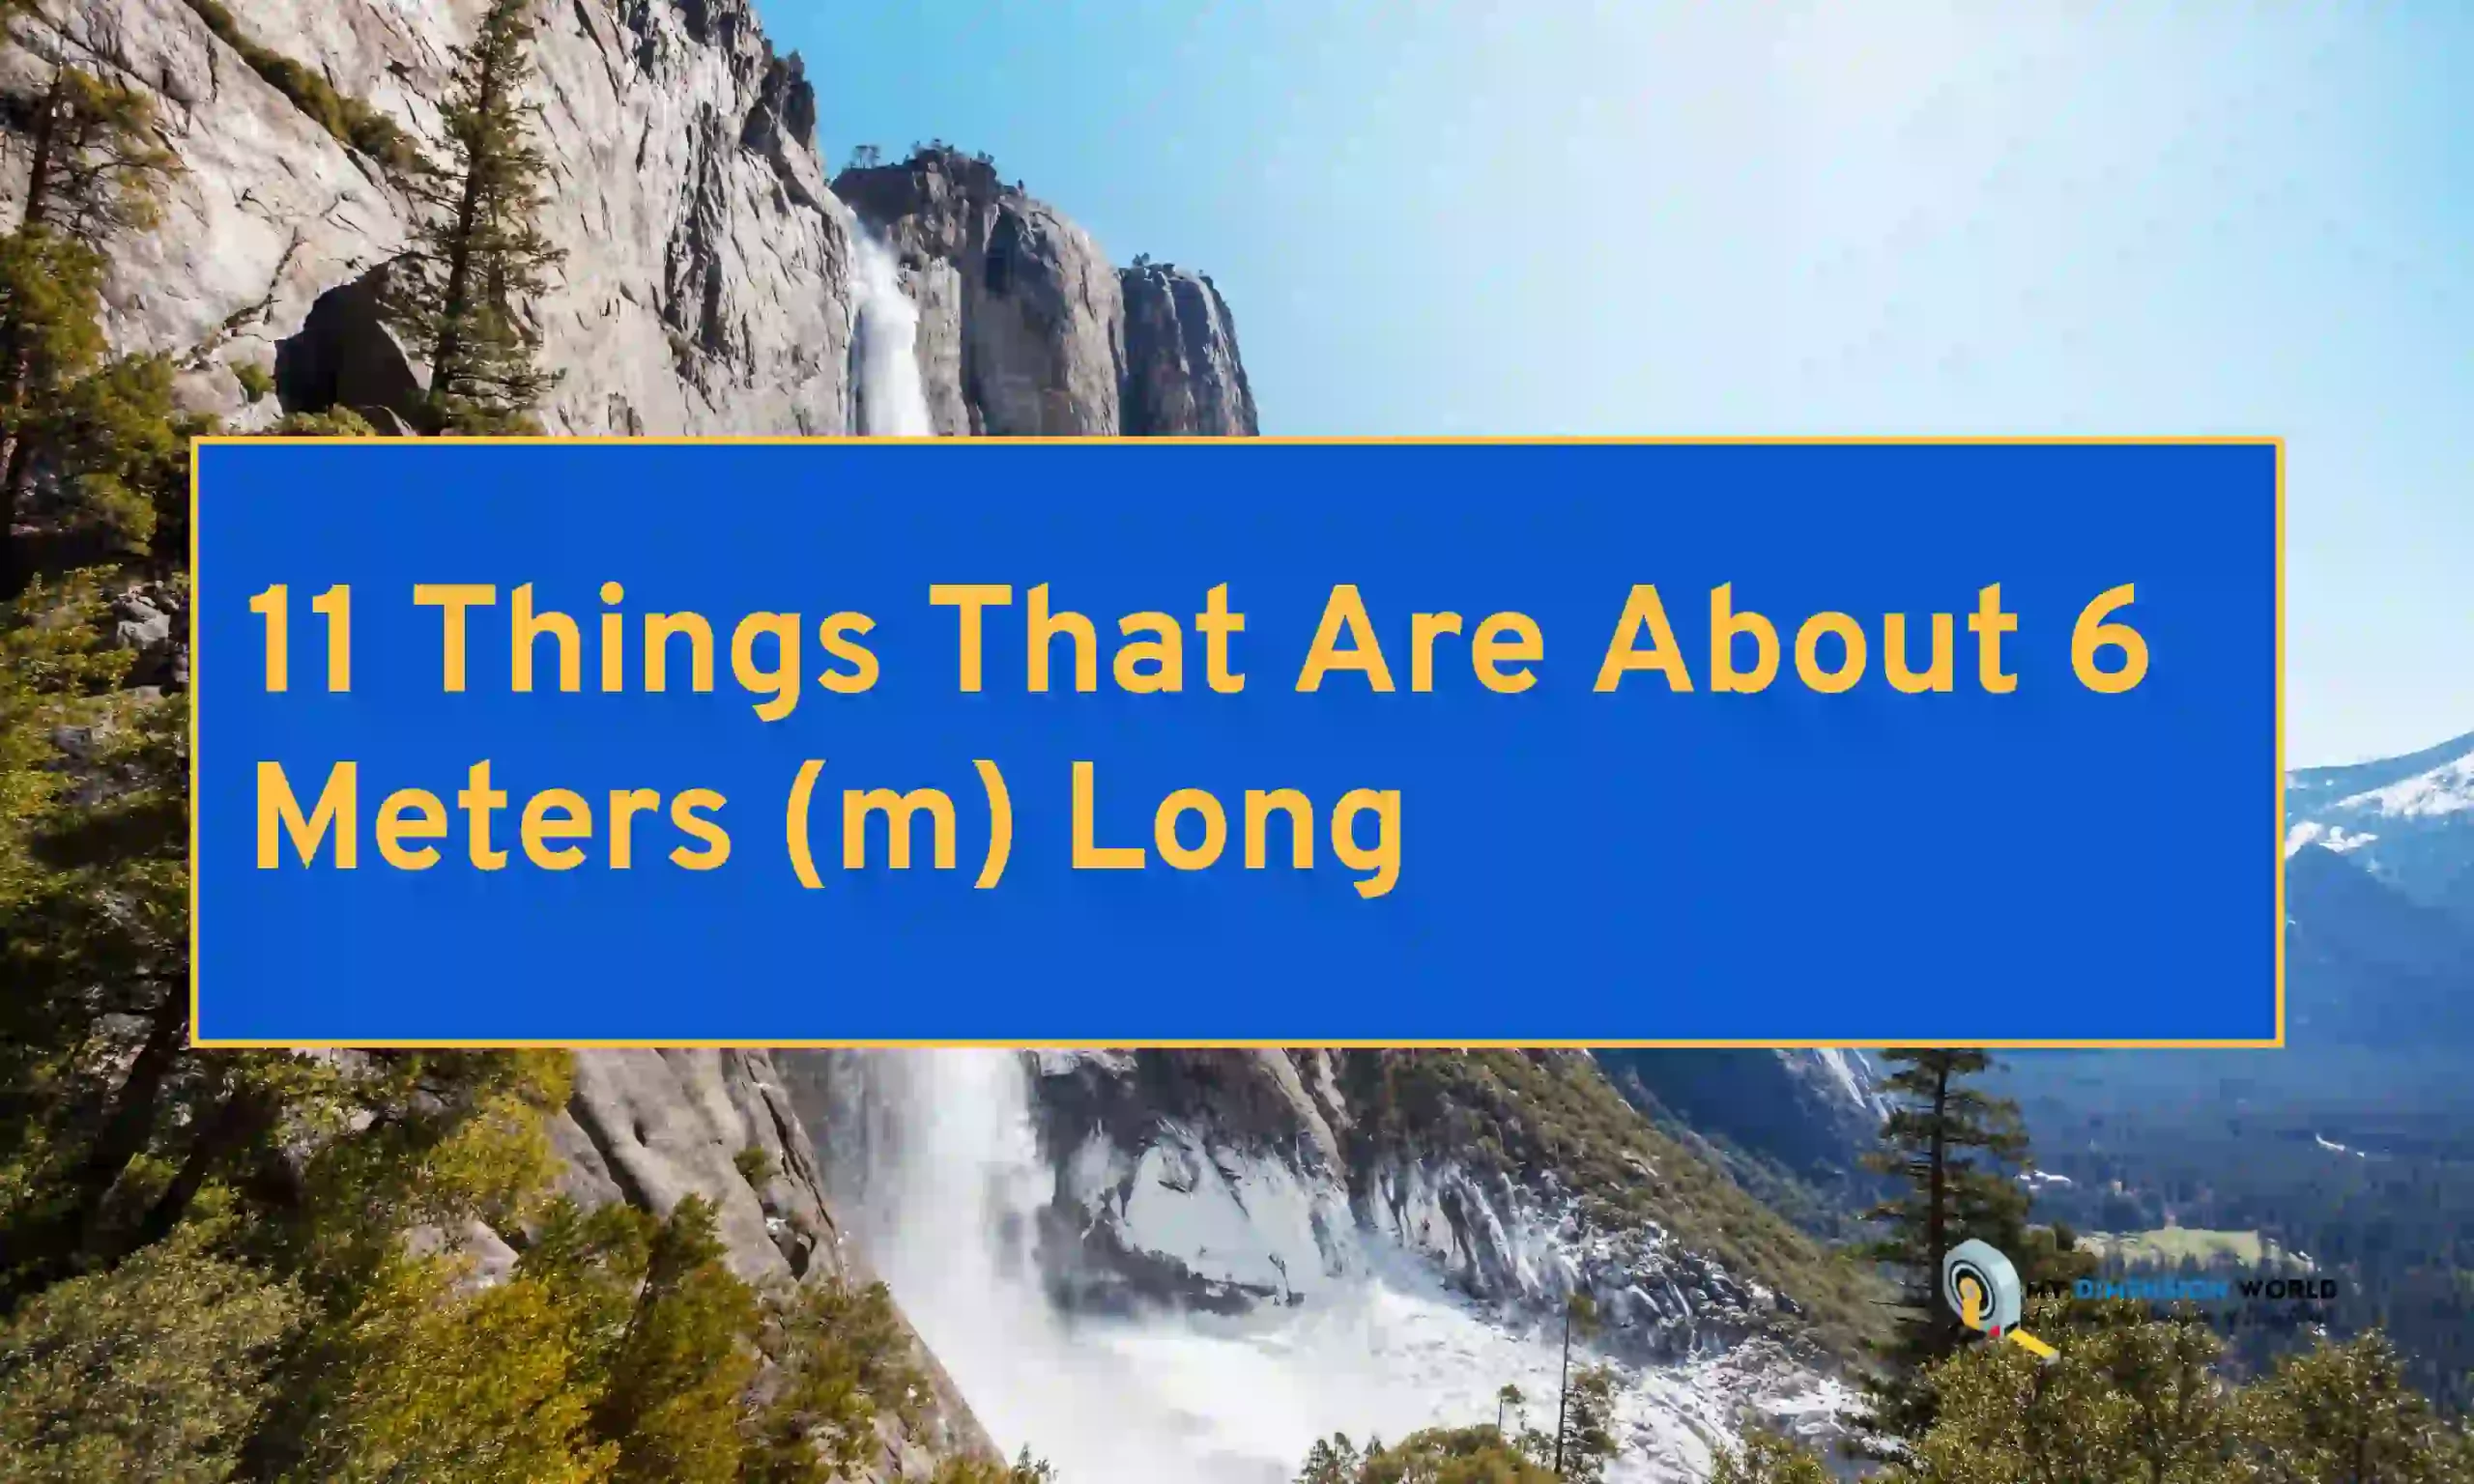 11 Things That Are About 6 Meters (m) Long